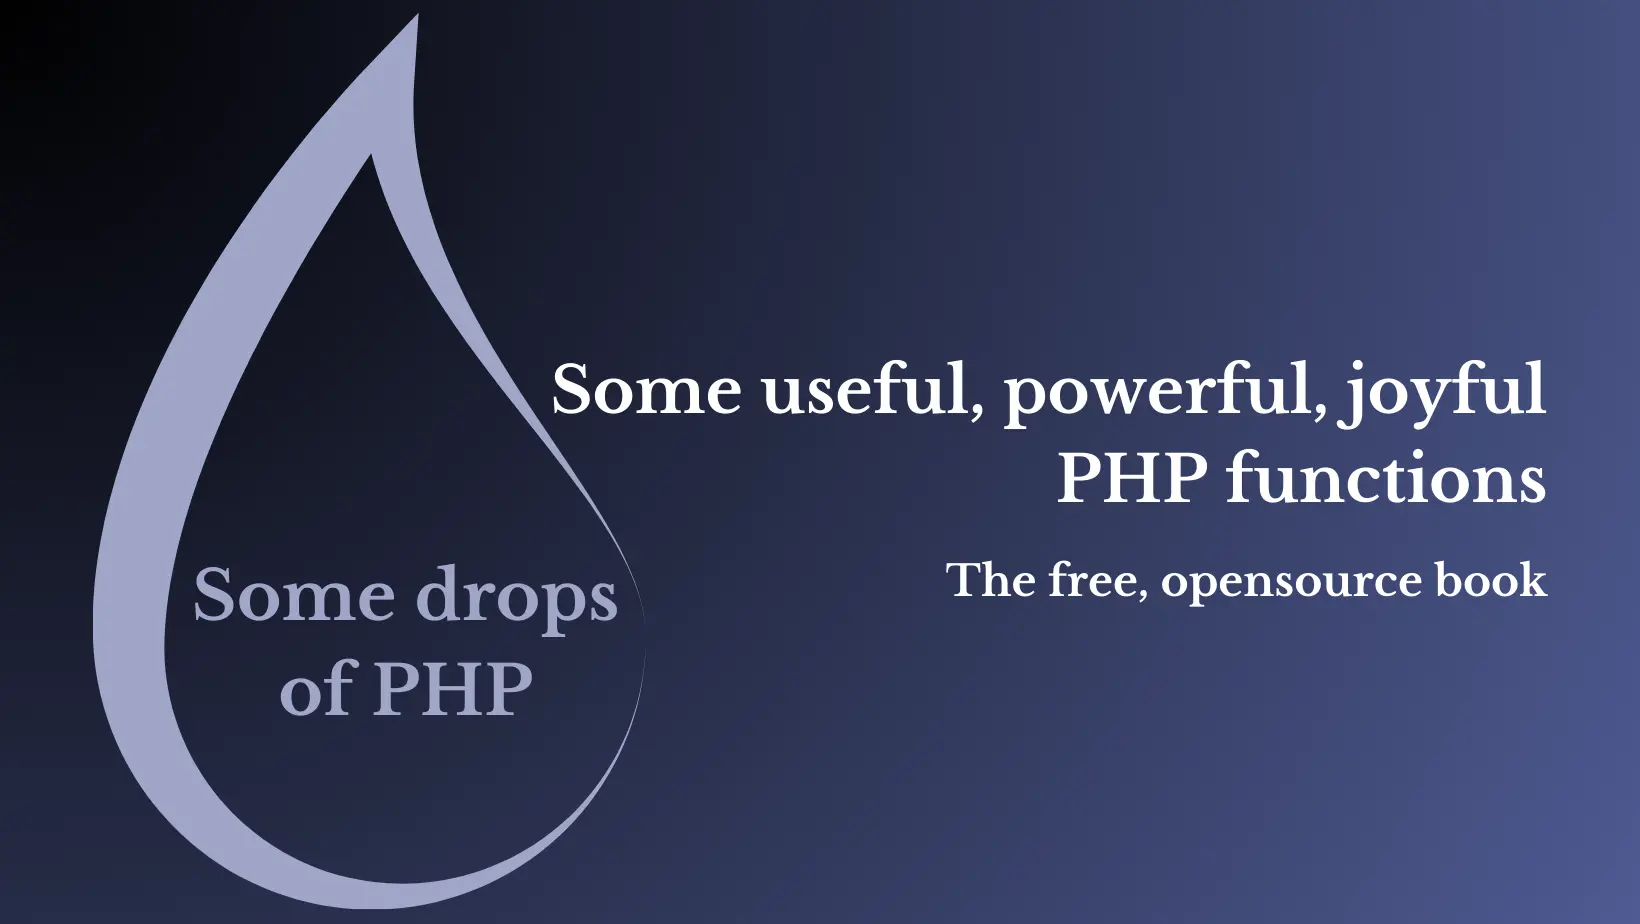 Some drops of PHP